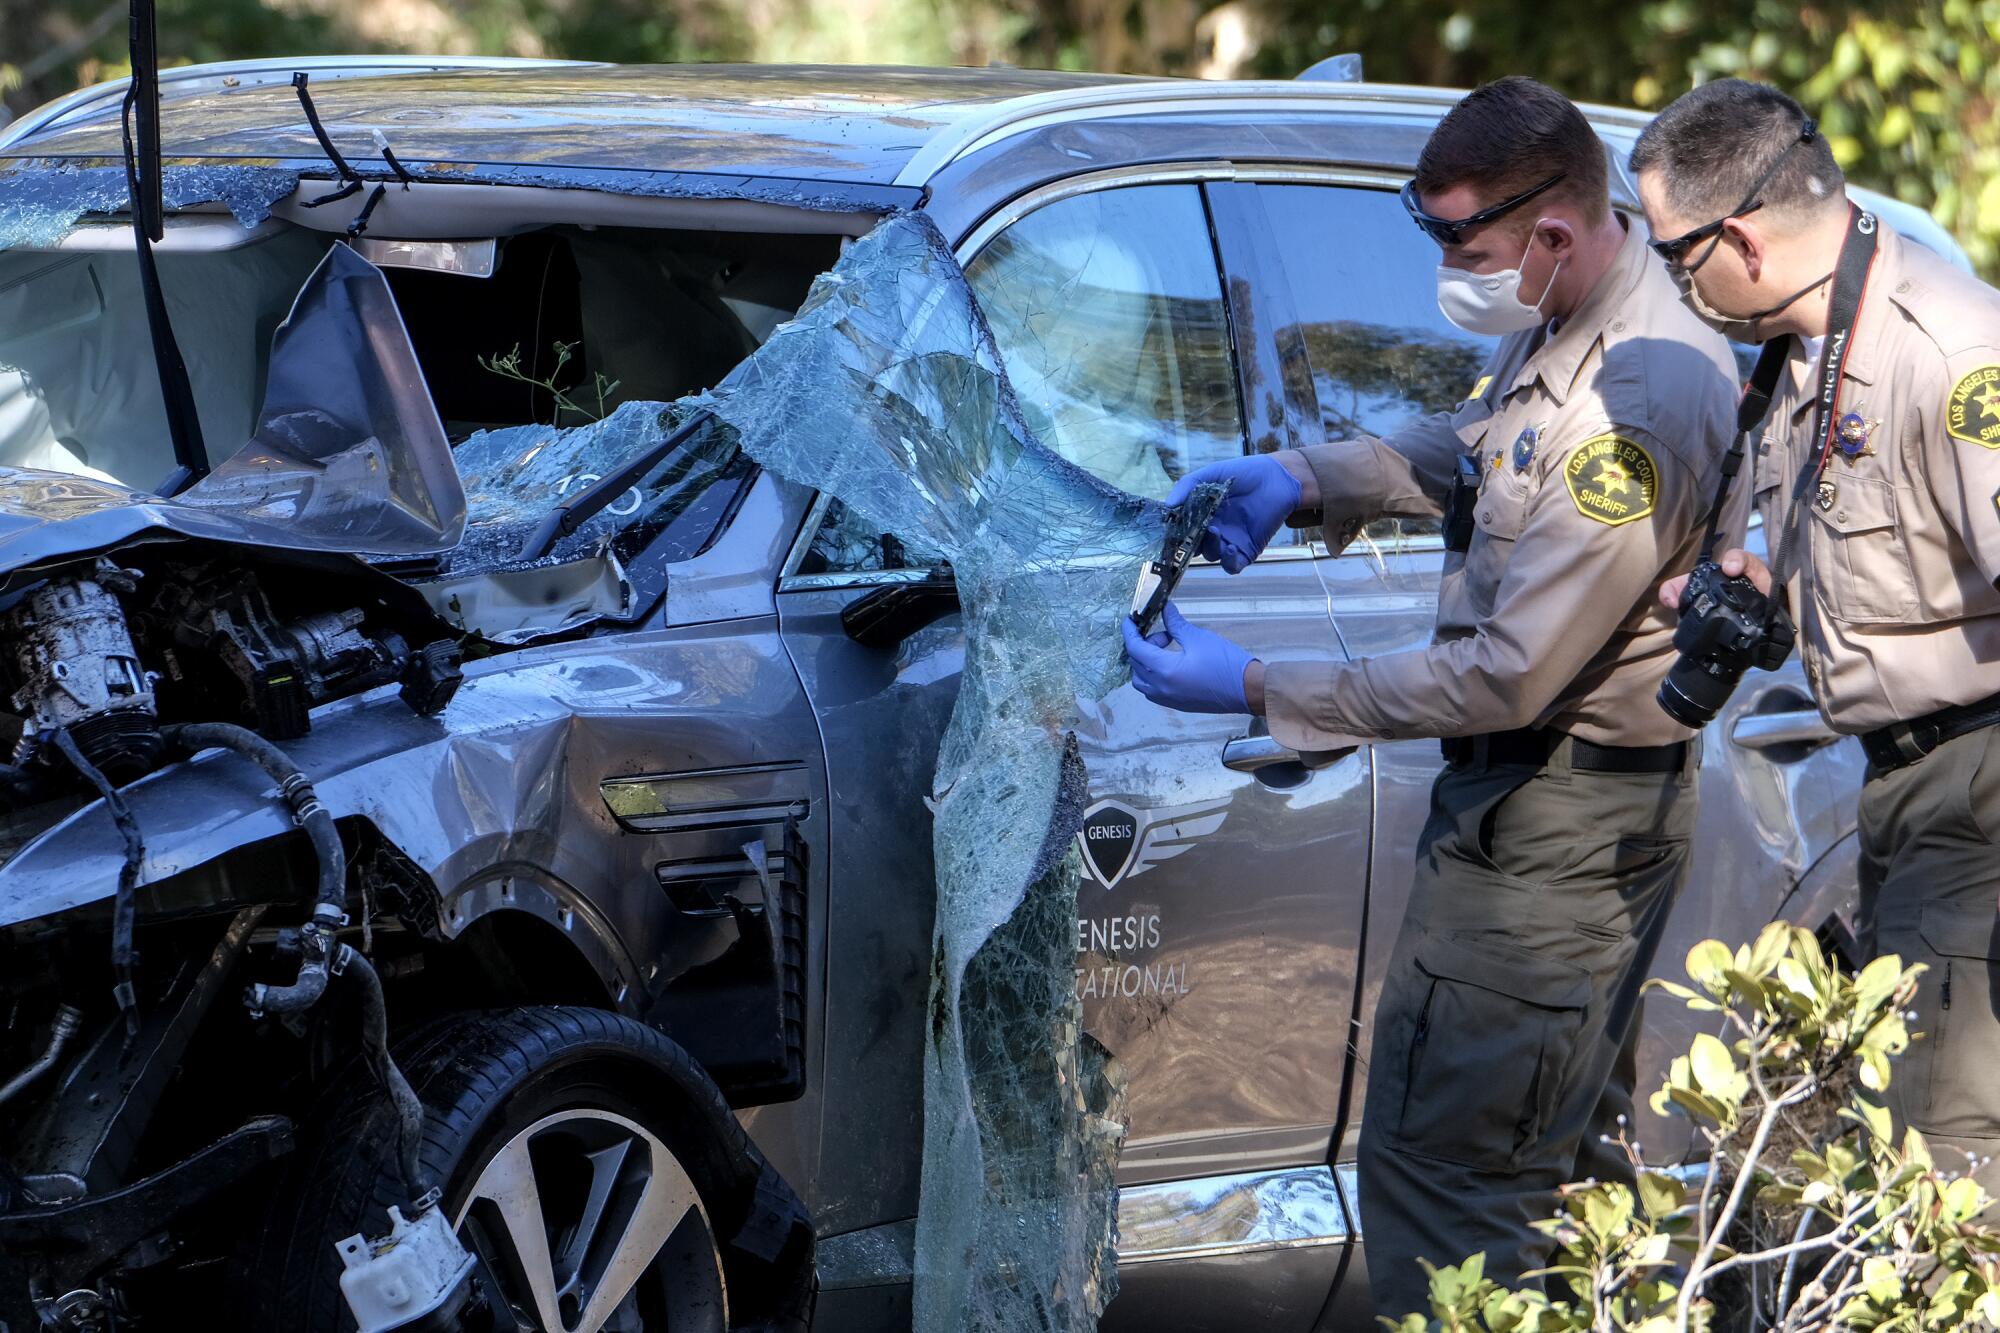 L.A. County sheriff's deputies look over the damaged vehicle.